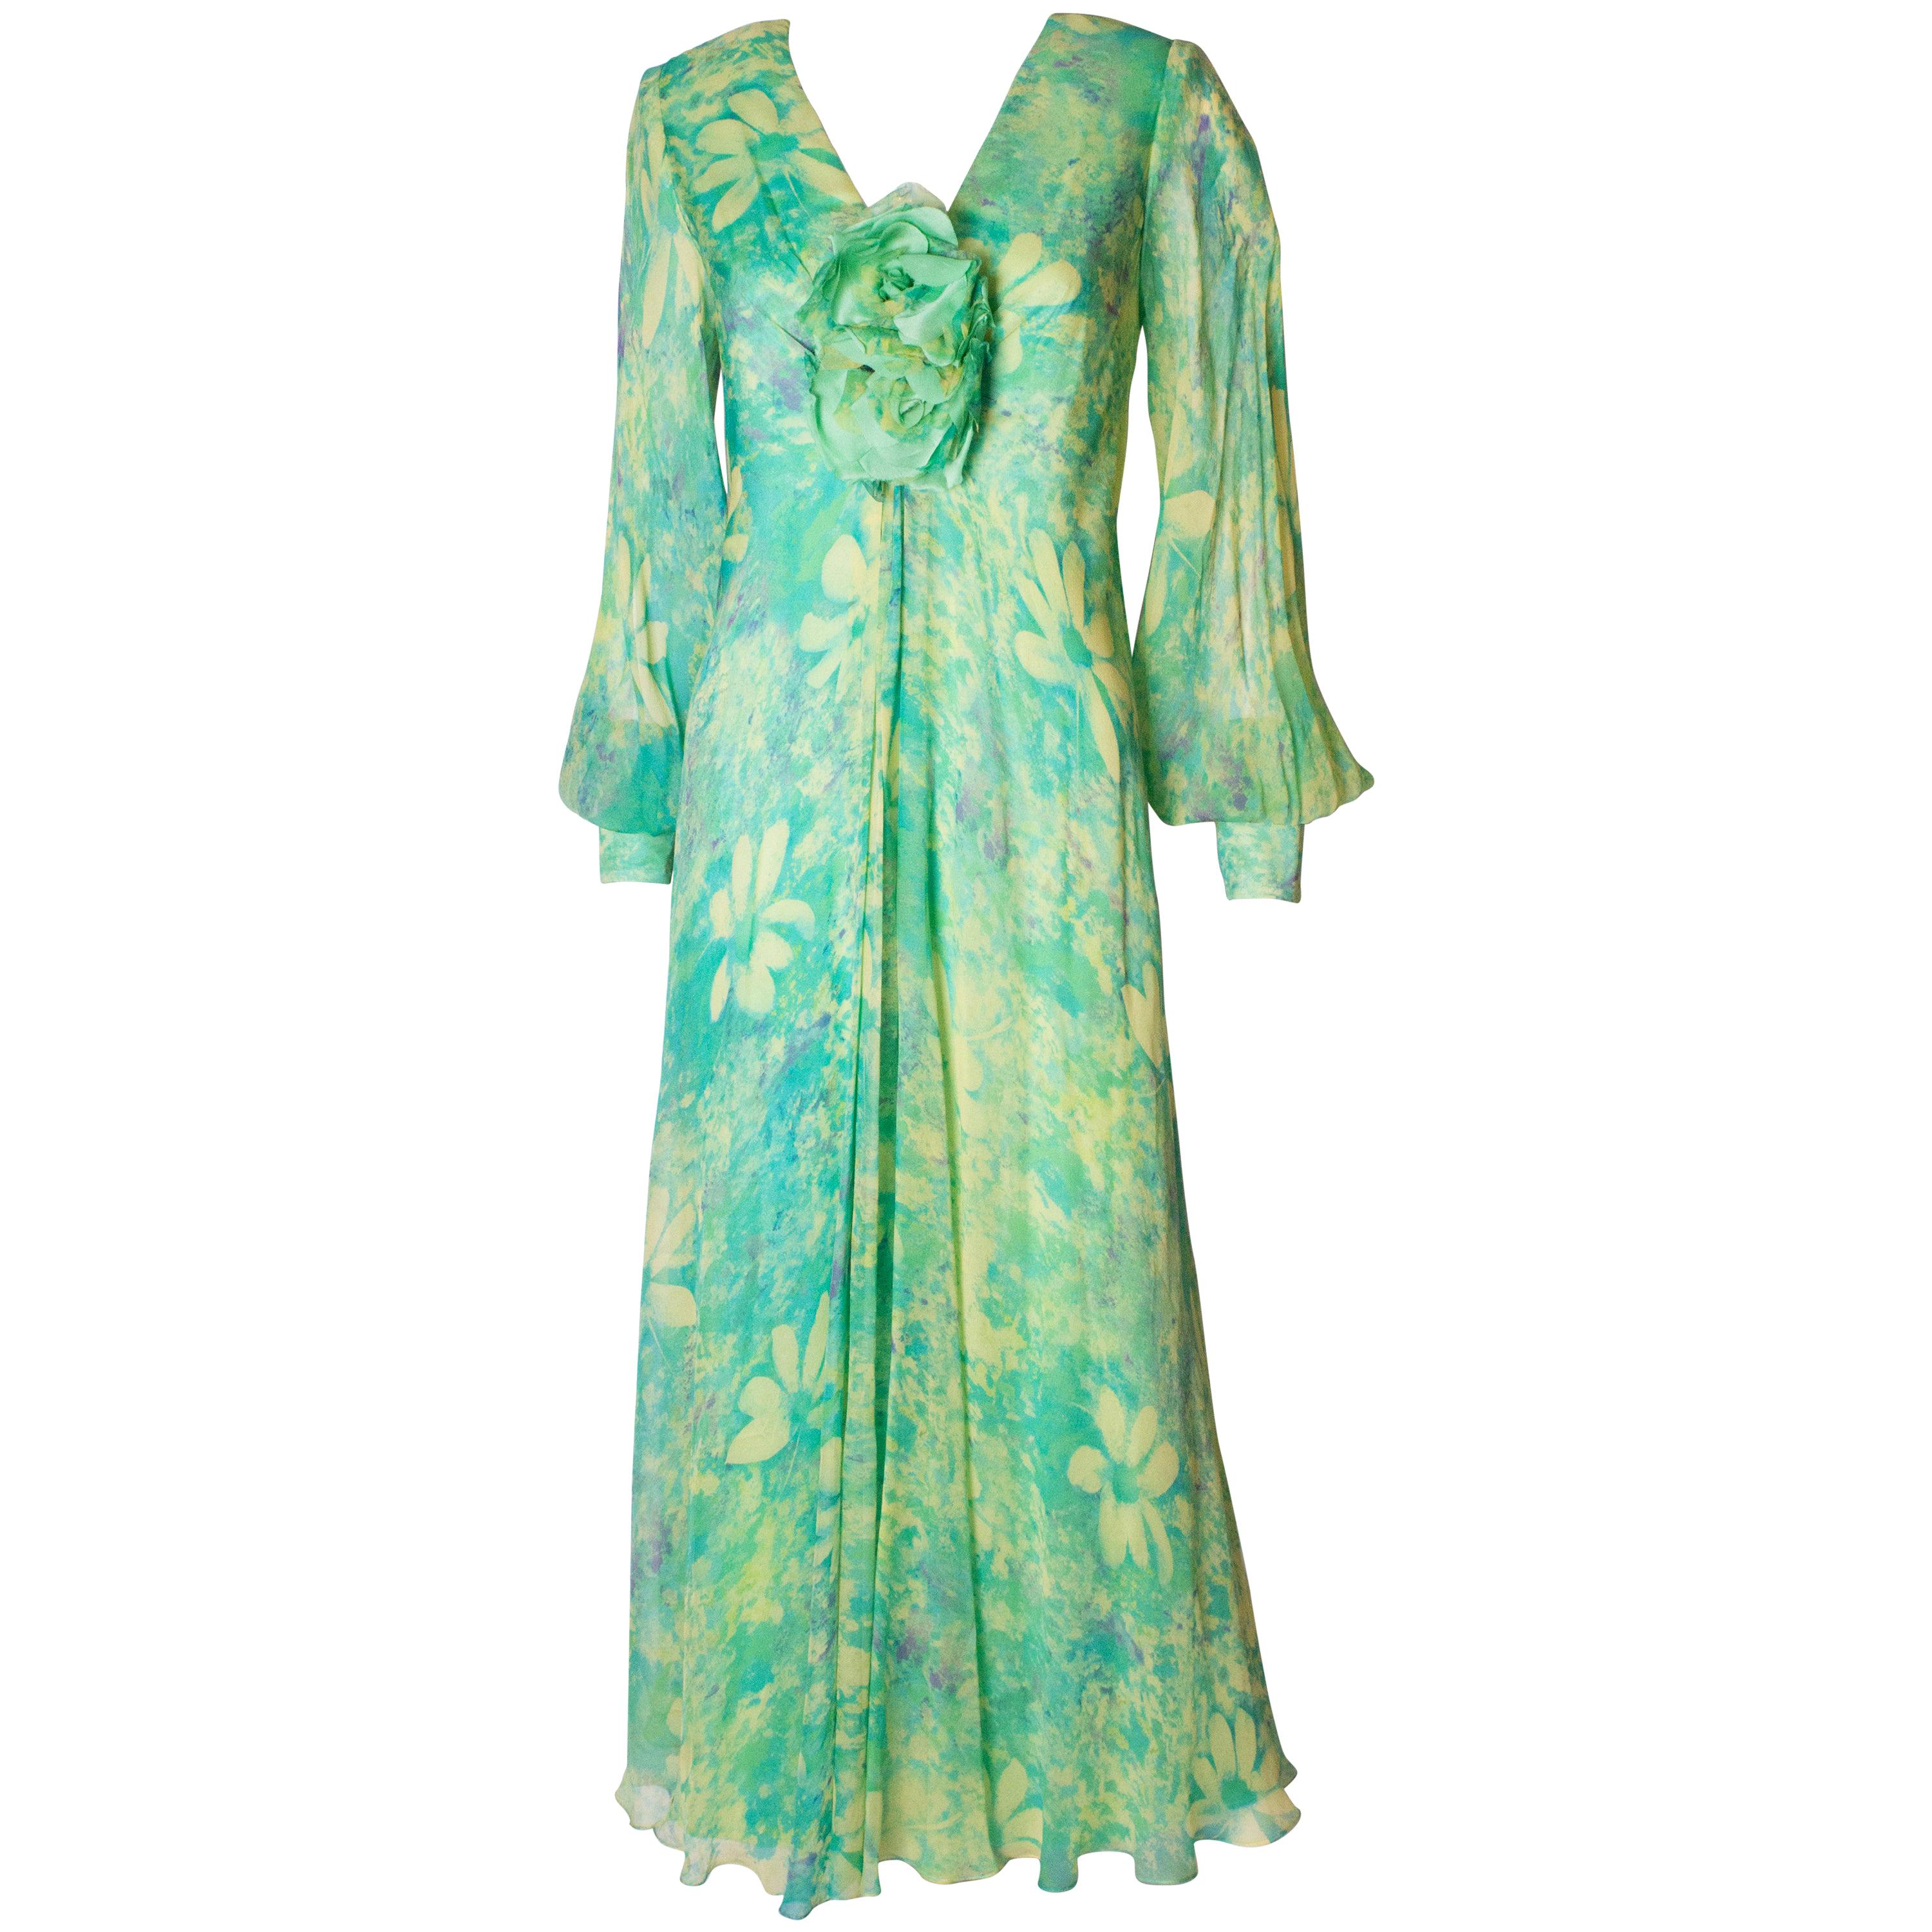 Vintage 1970s green floral print silk dress by Alison Rodger